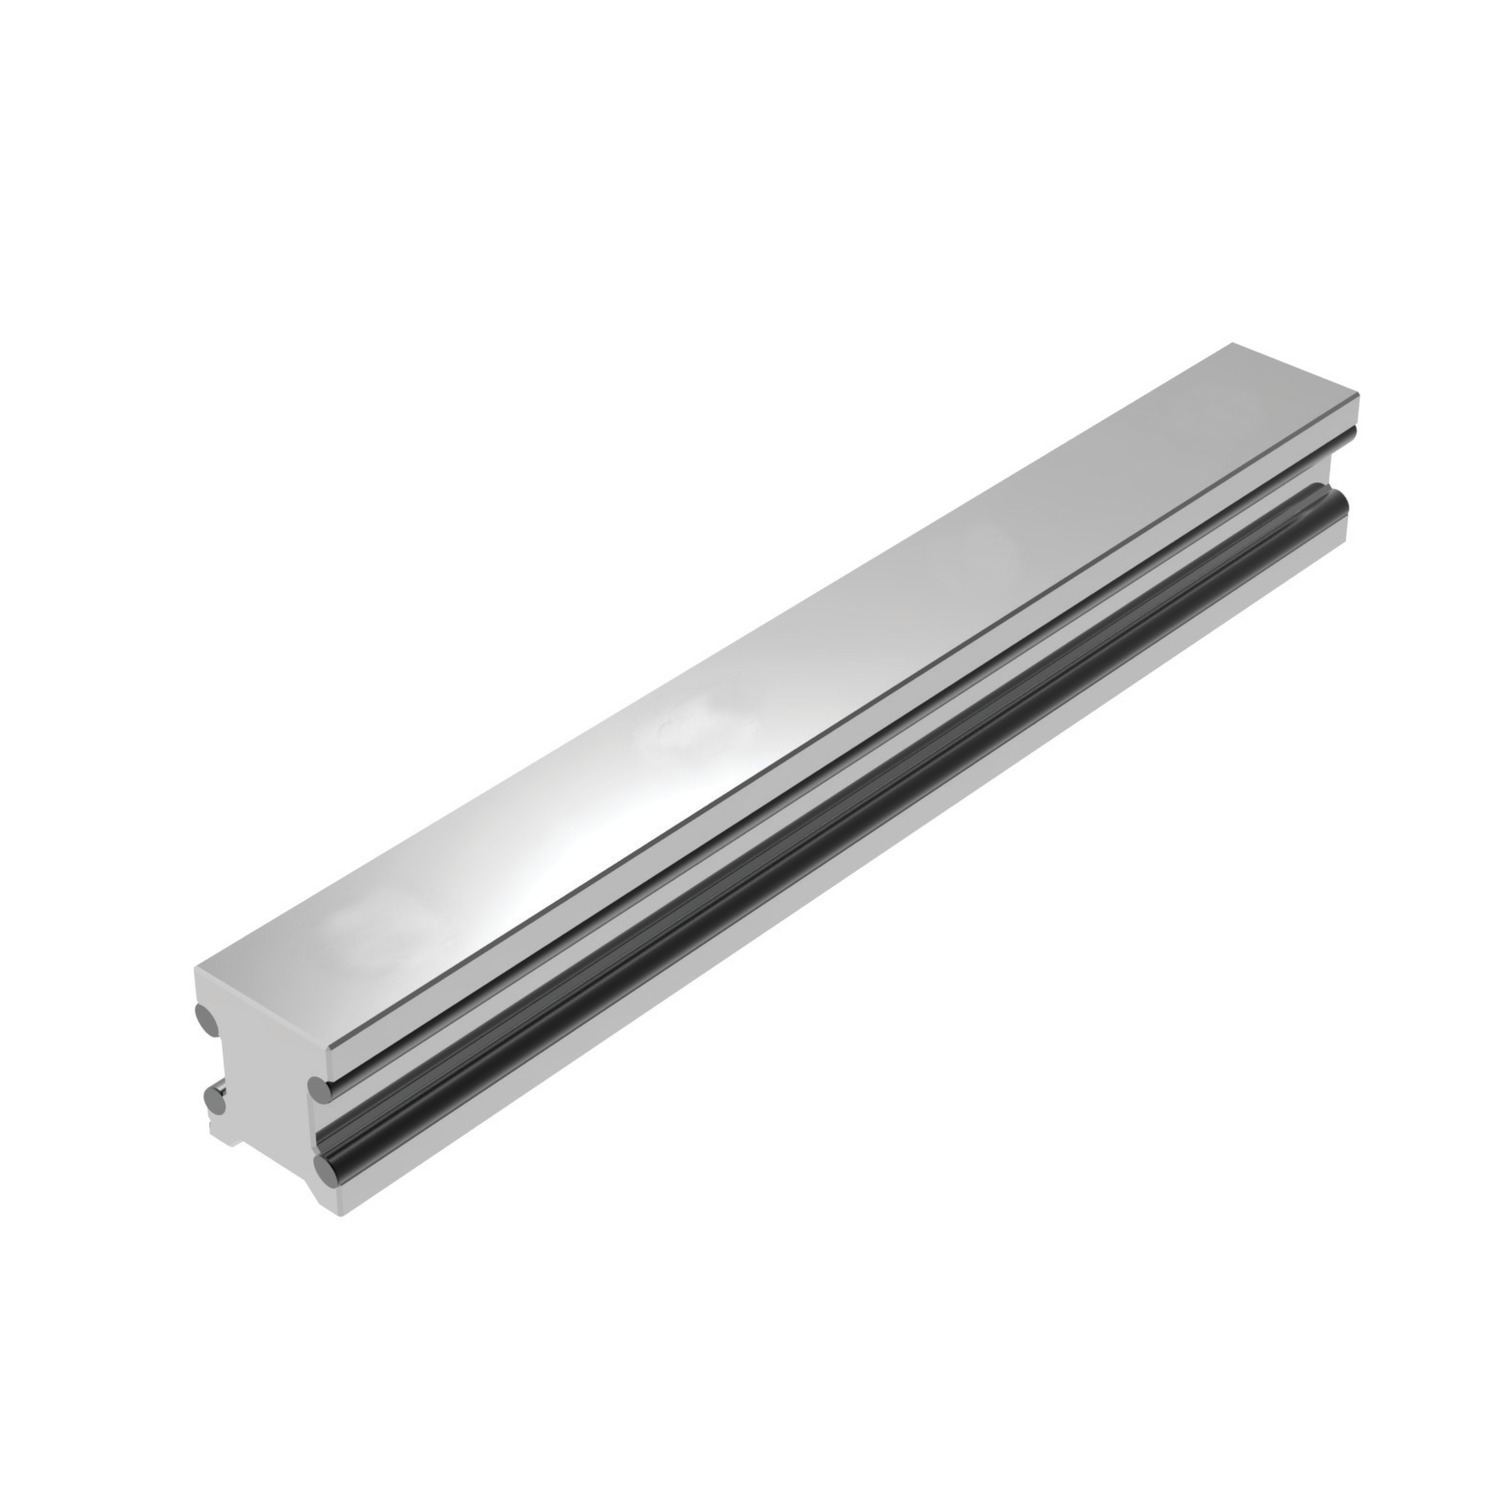 Product L1018.20, 20mm Aluminium Linear Guide Rail rear fixing with stainless raceways / 